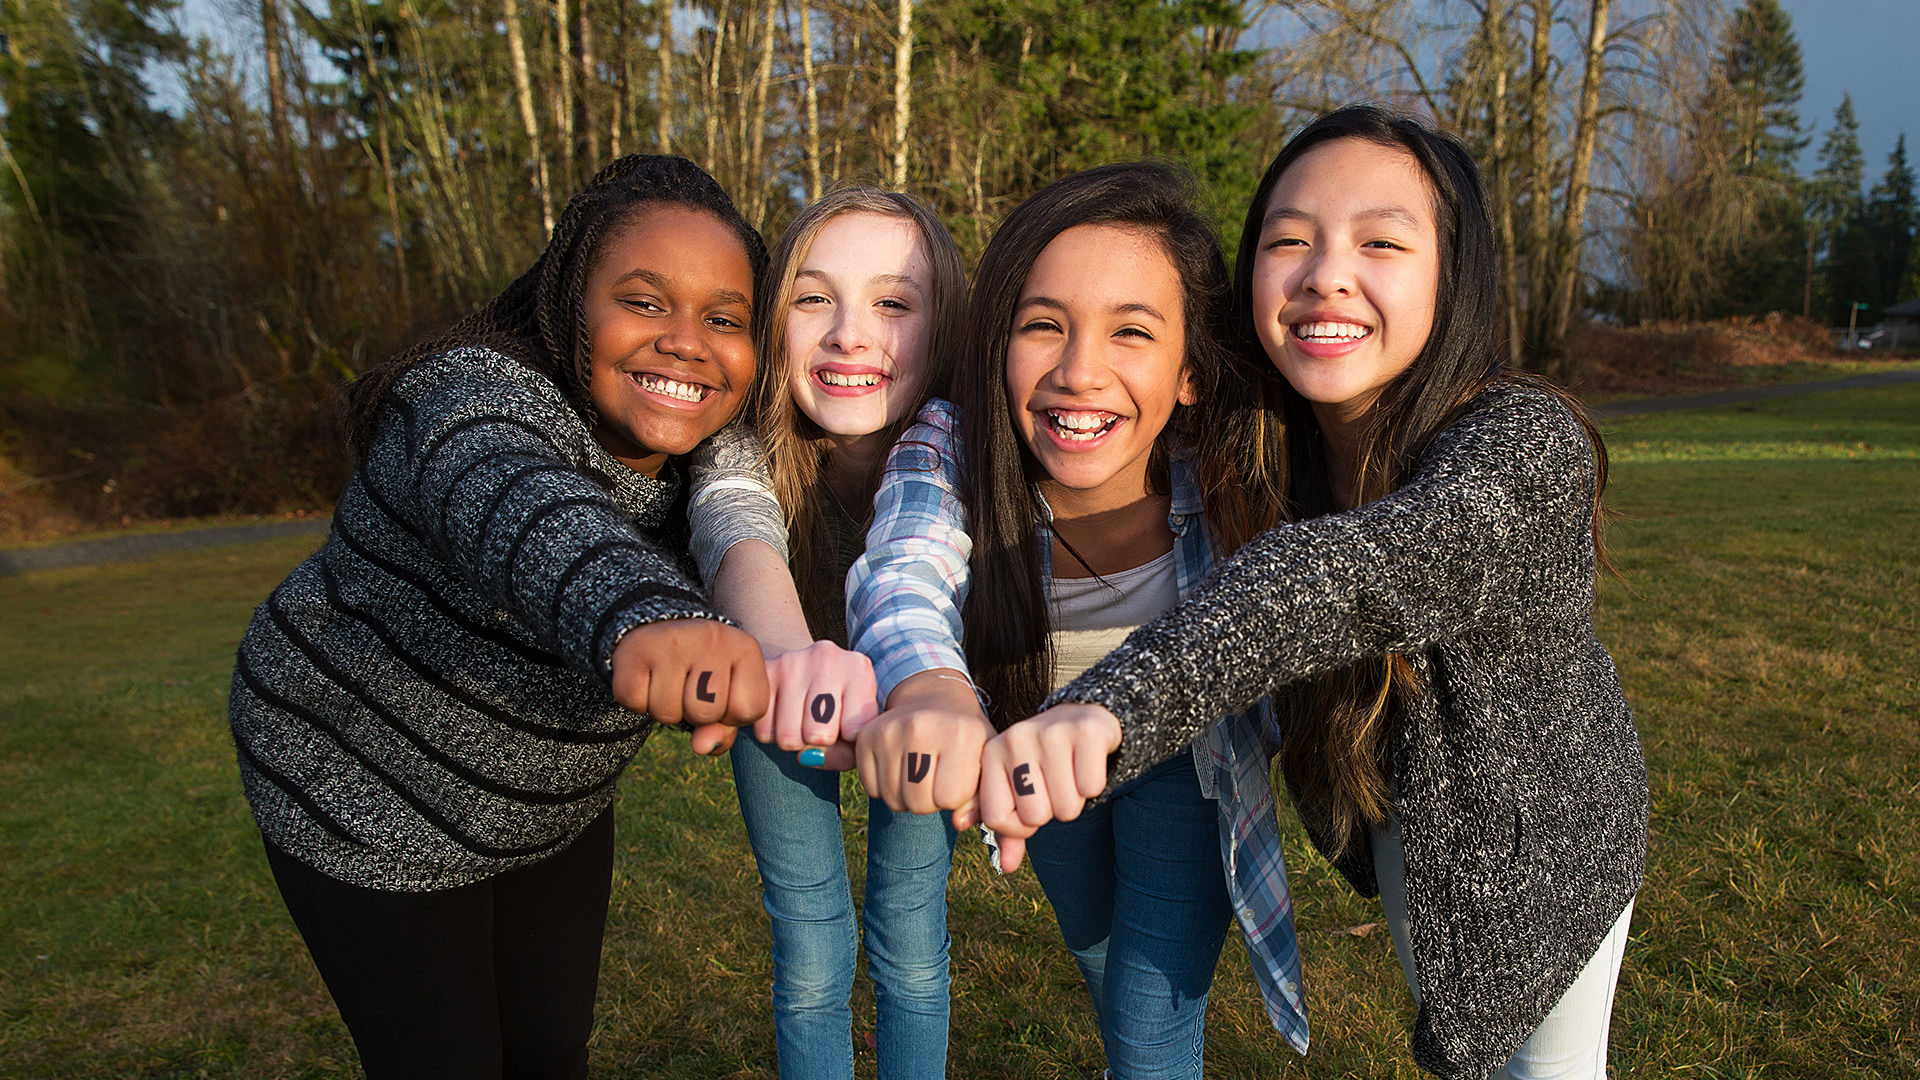 Teen girls with the word LOVE written on their hands